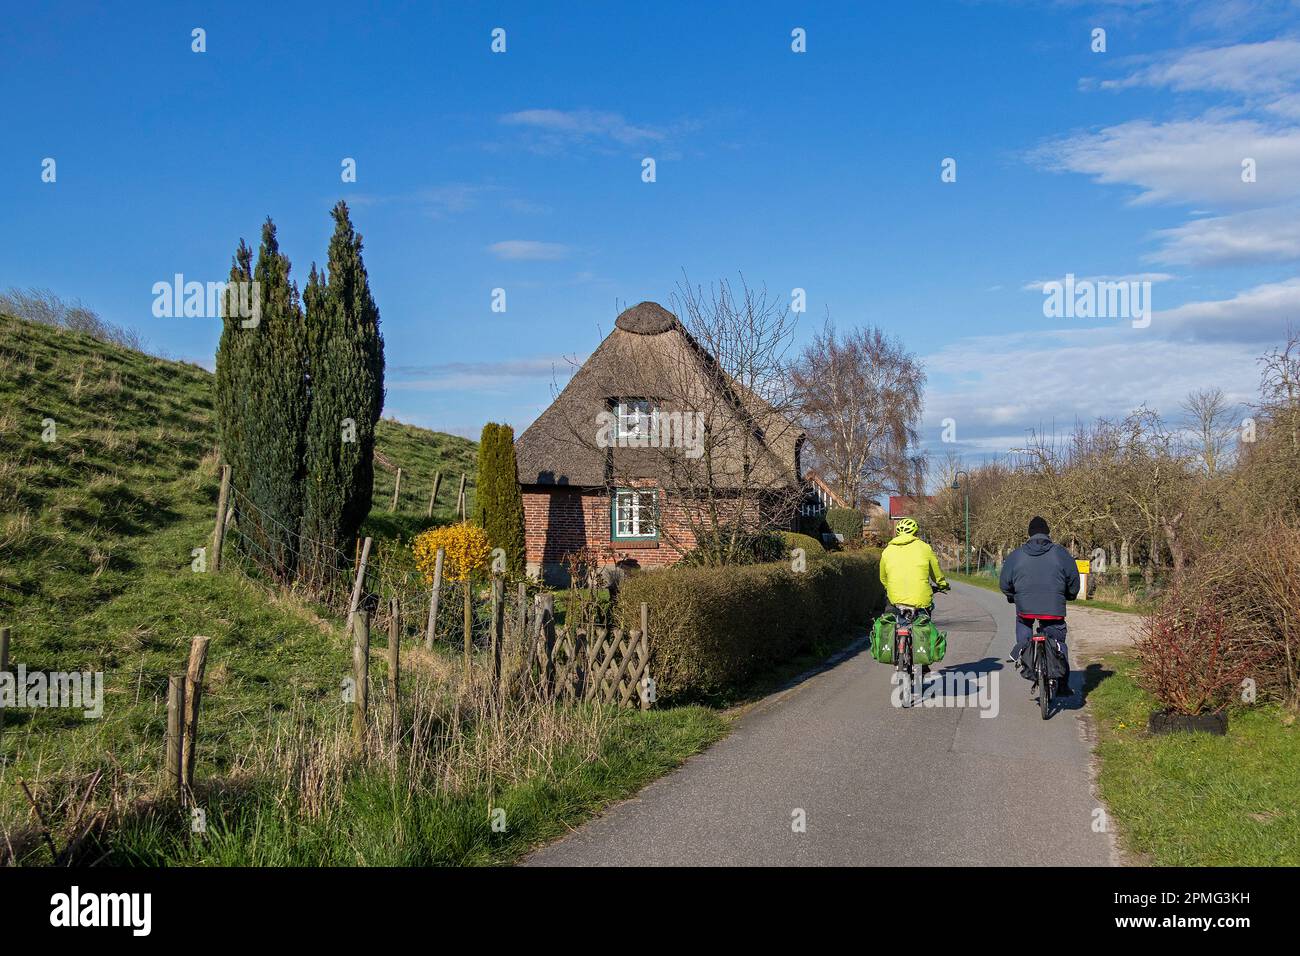 Thatched house, cyclists,  bicycle path, Haselau, Schleswig-Holstein, Germany Stock Photo